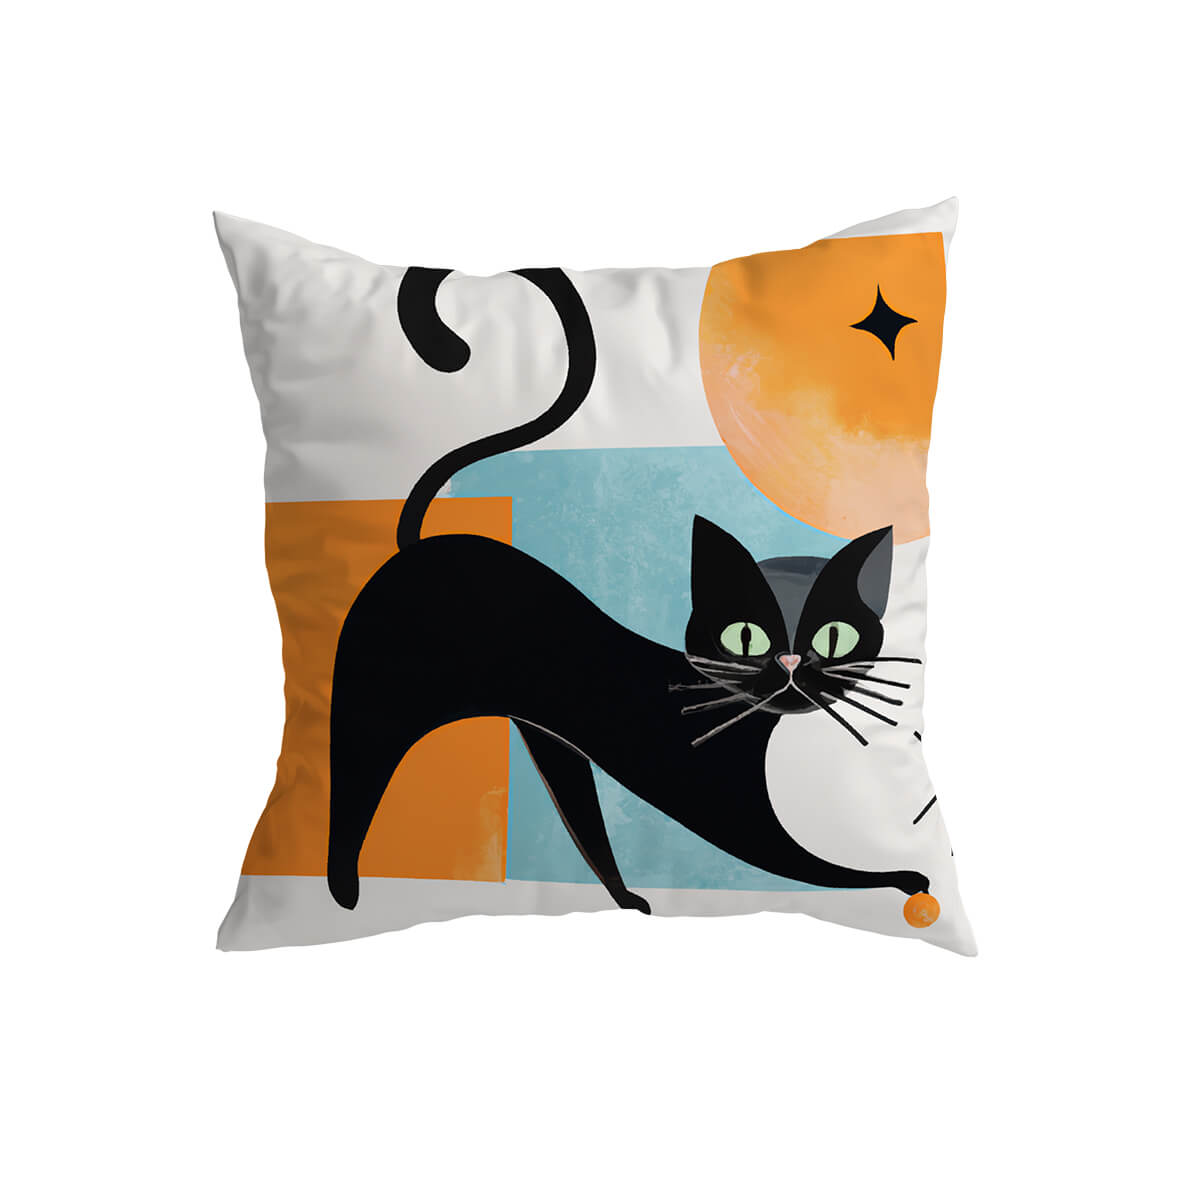 Astronomic Cats Cushion Cover